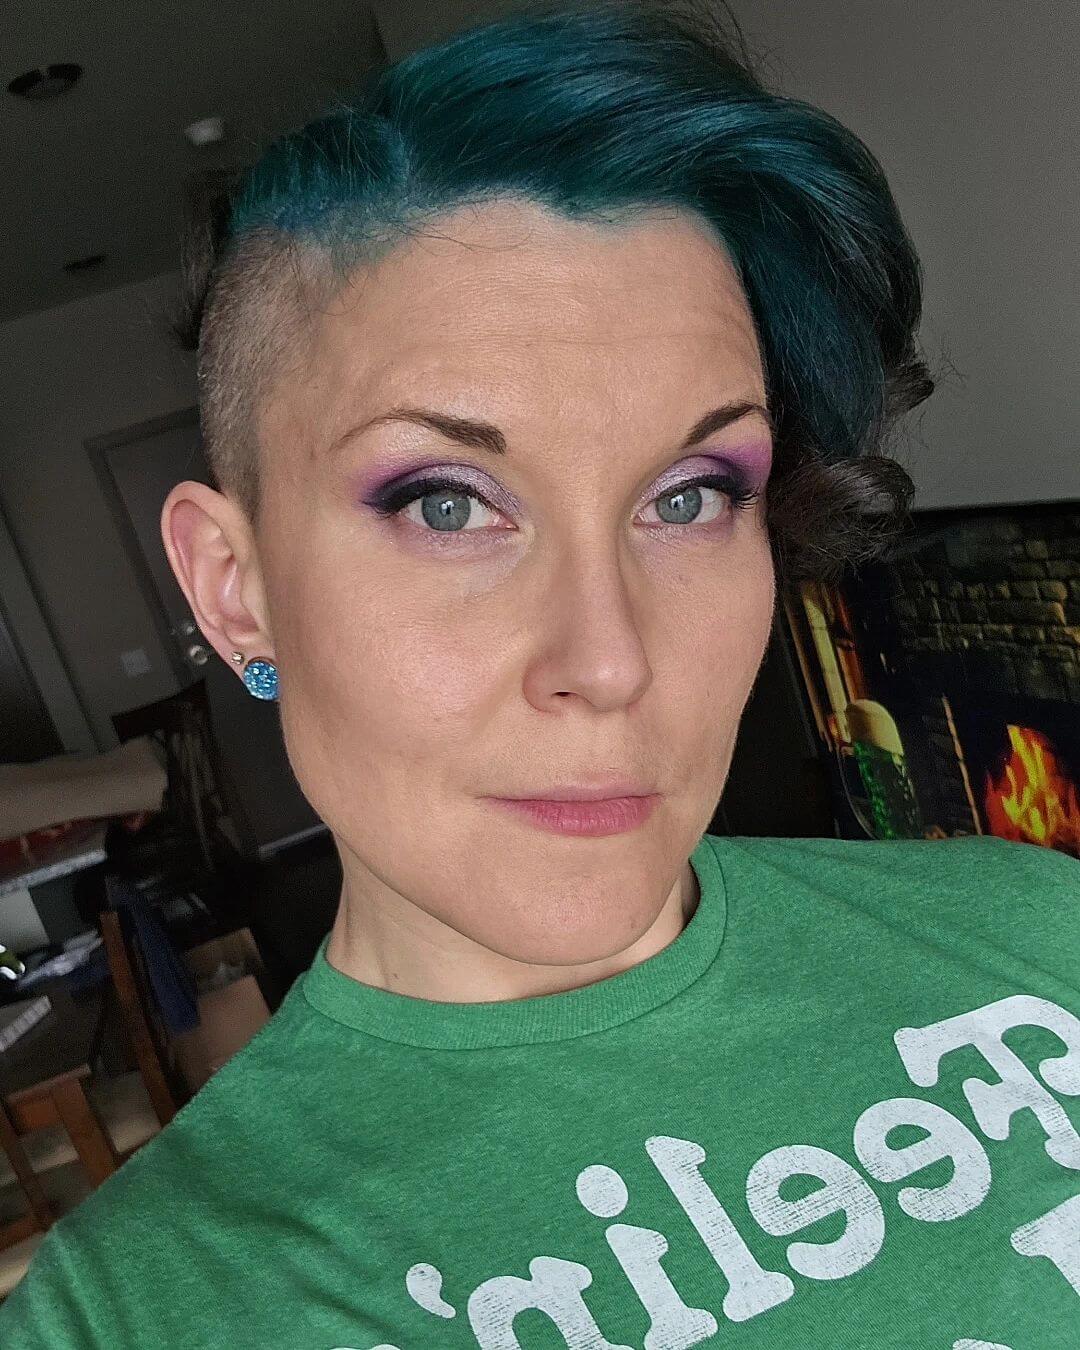 Asymmetrical style with bold teal color and shaved side